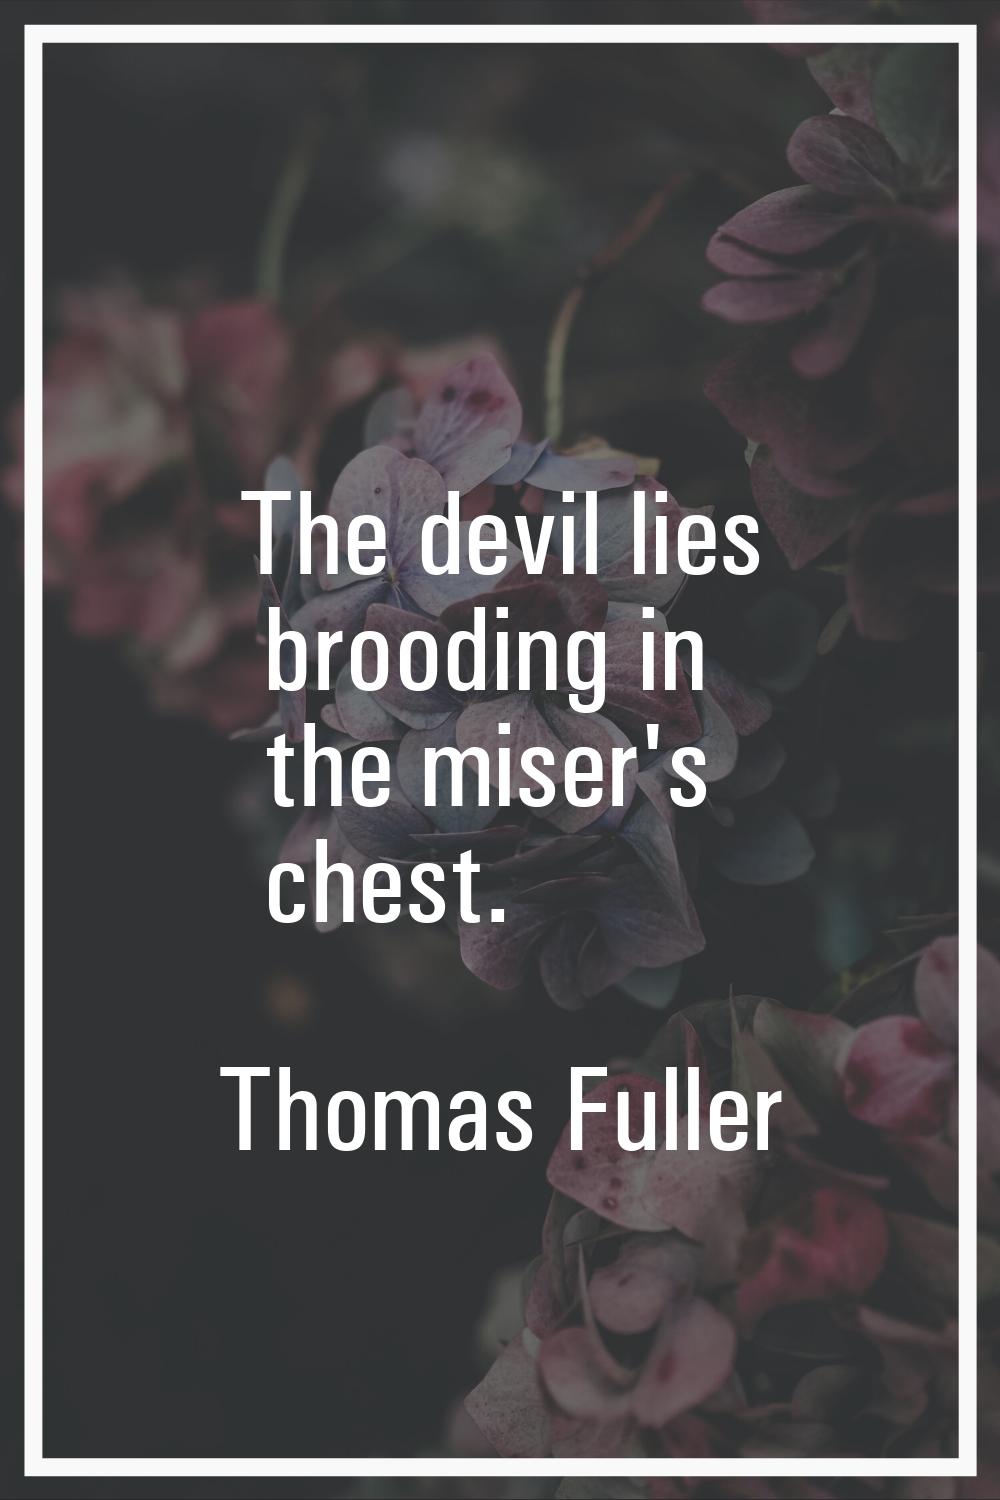 The devil lies brooding in the miser's chest.